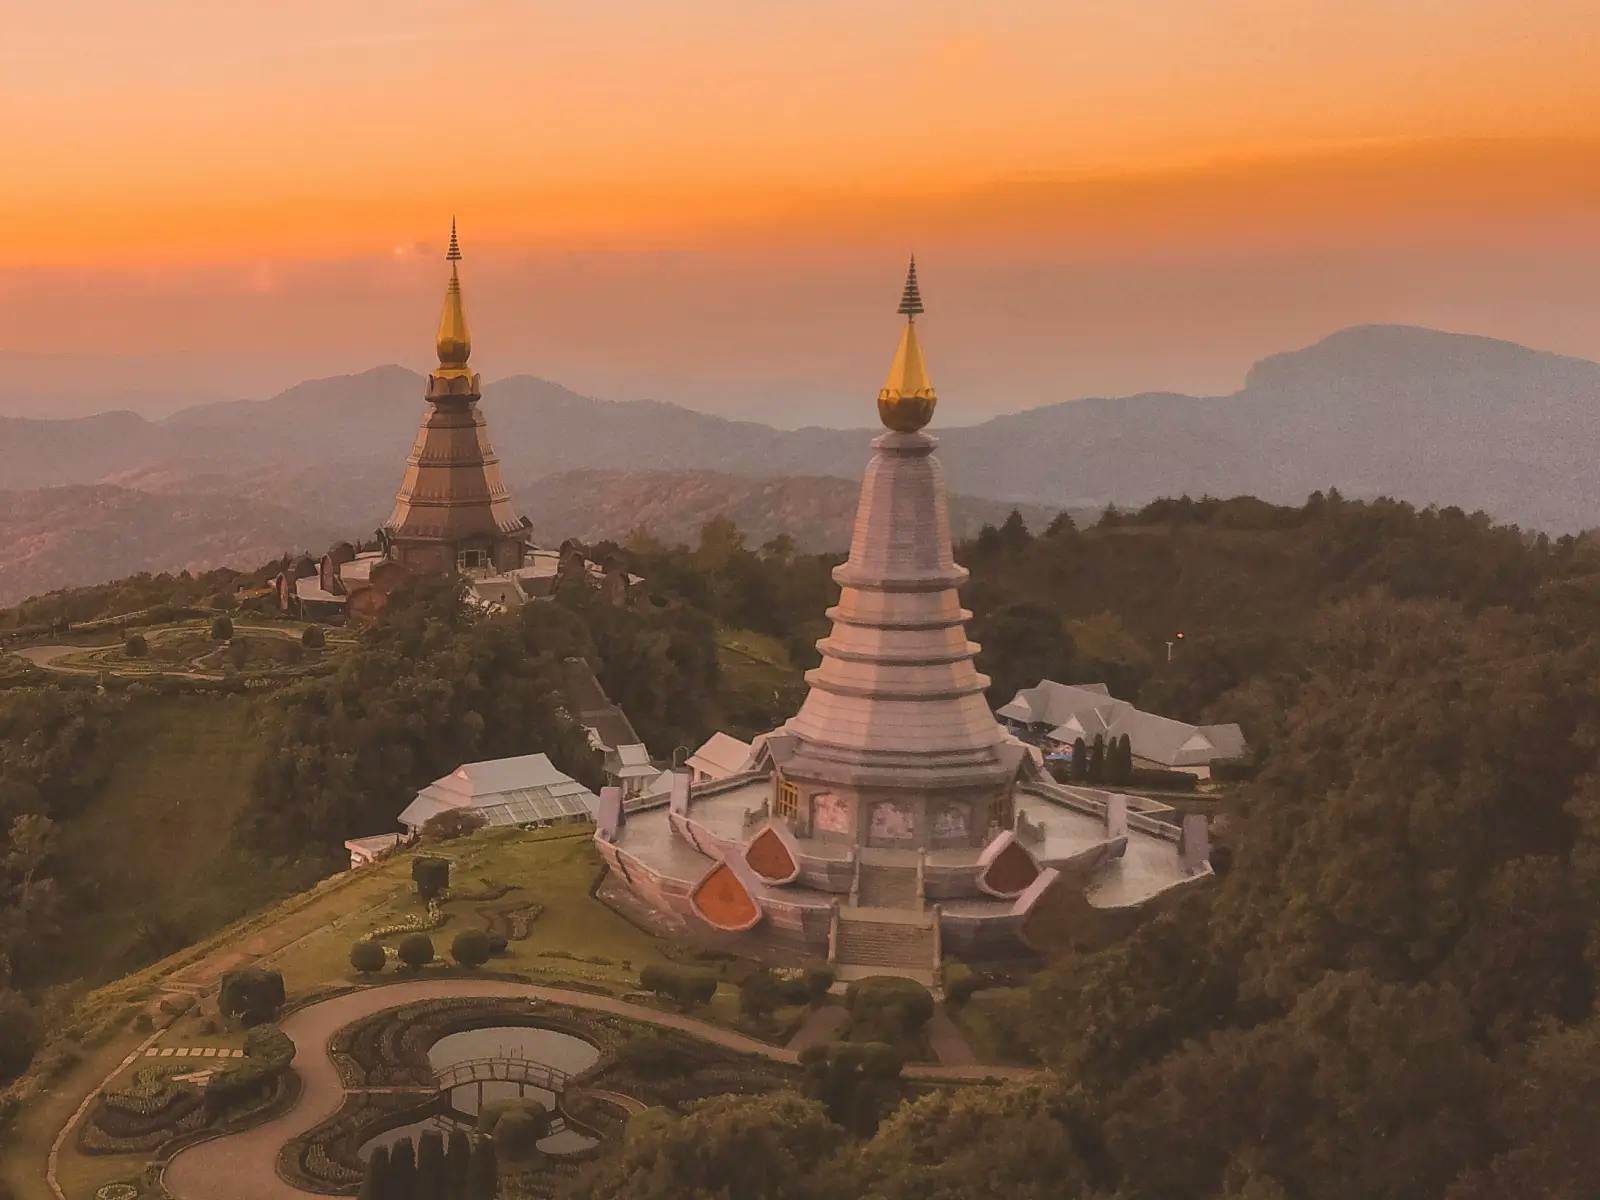 An aerial view of two golden pagodas on top of a hill with a beautiful sunset in the background. The pagodas are located in Doi Inthanon National Park, Thailand.